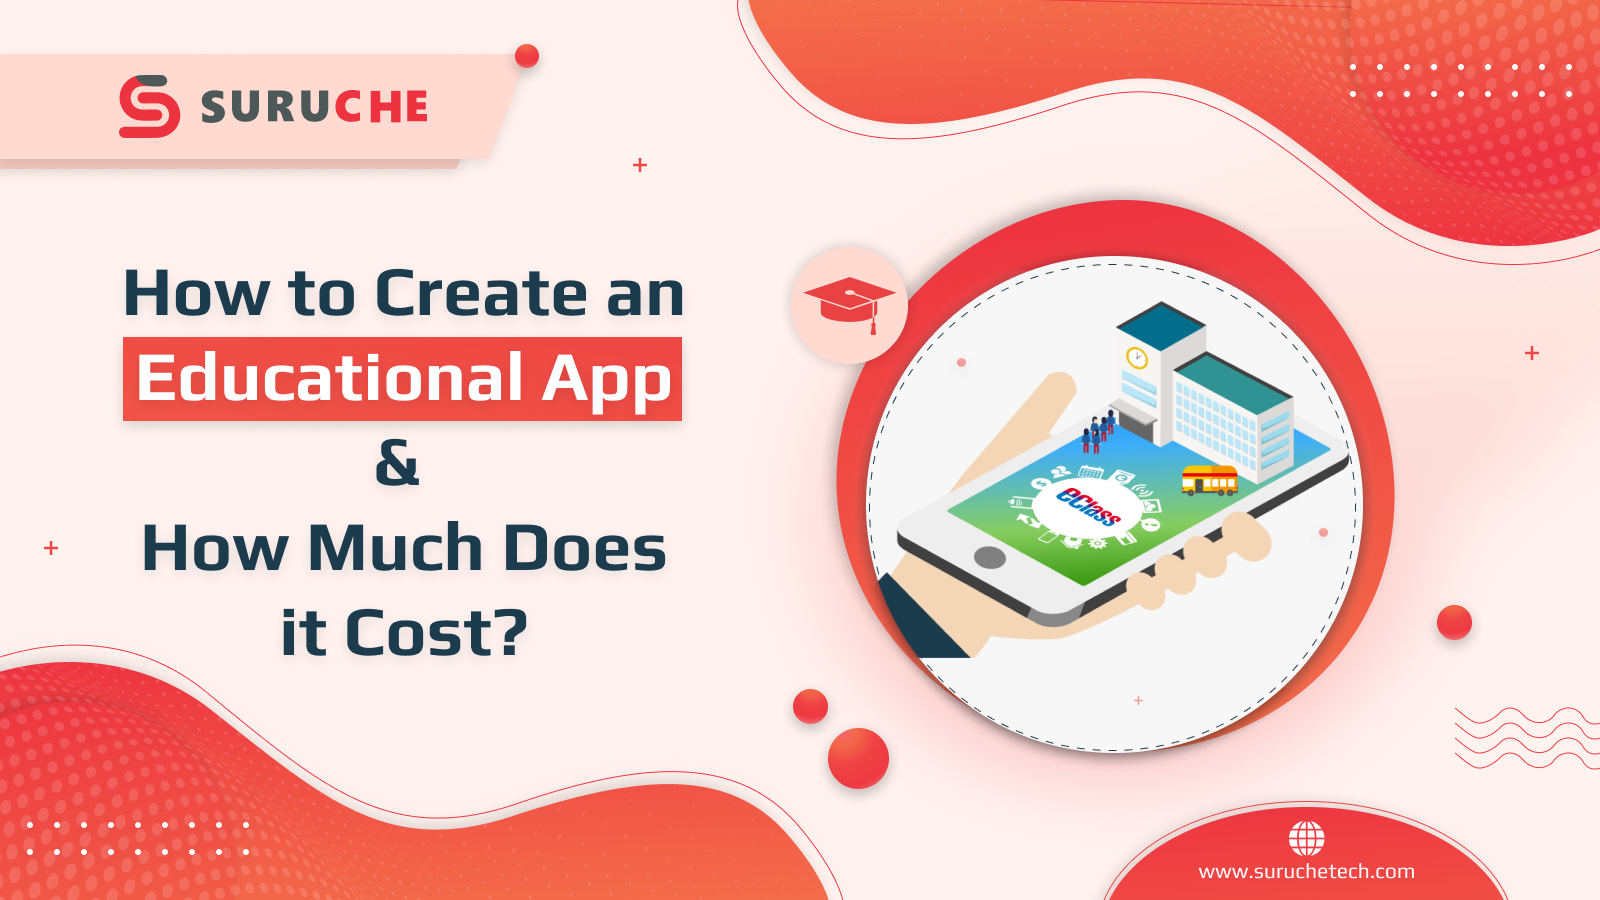 How to Create an Educational App & How Much Does it Cost?